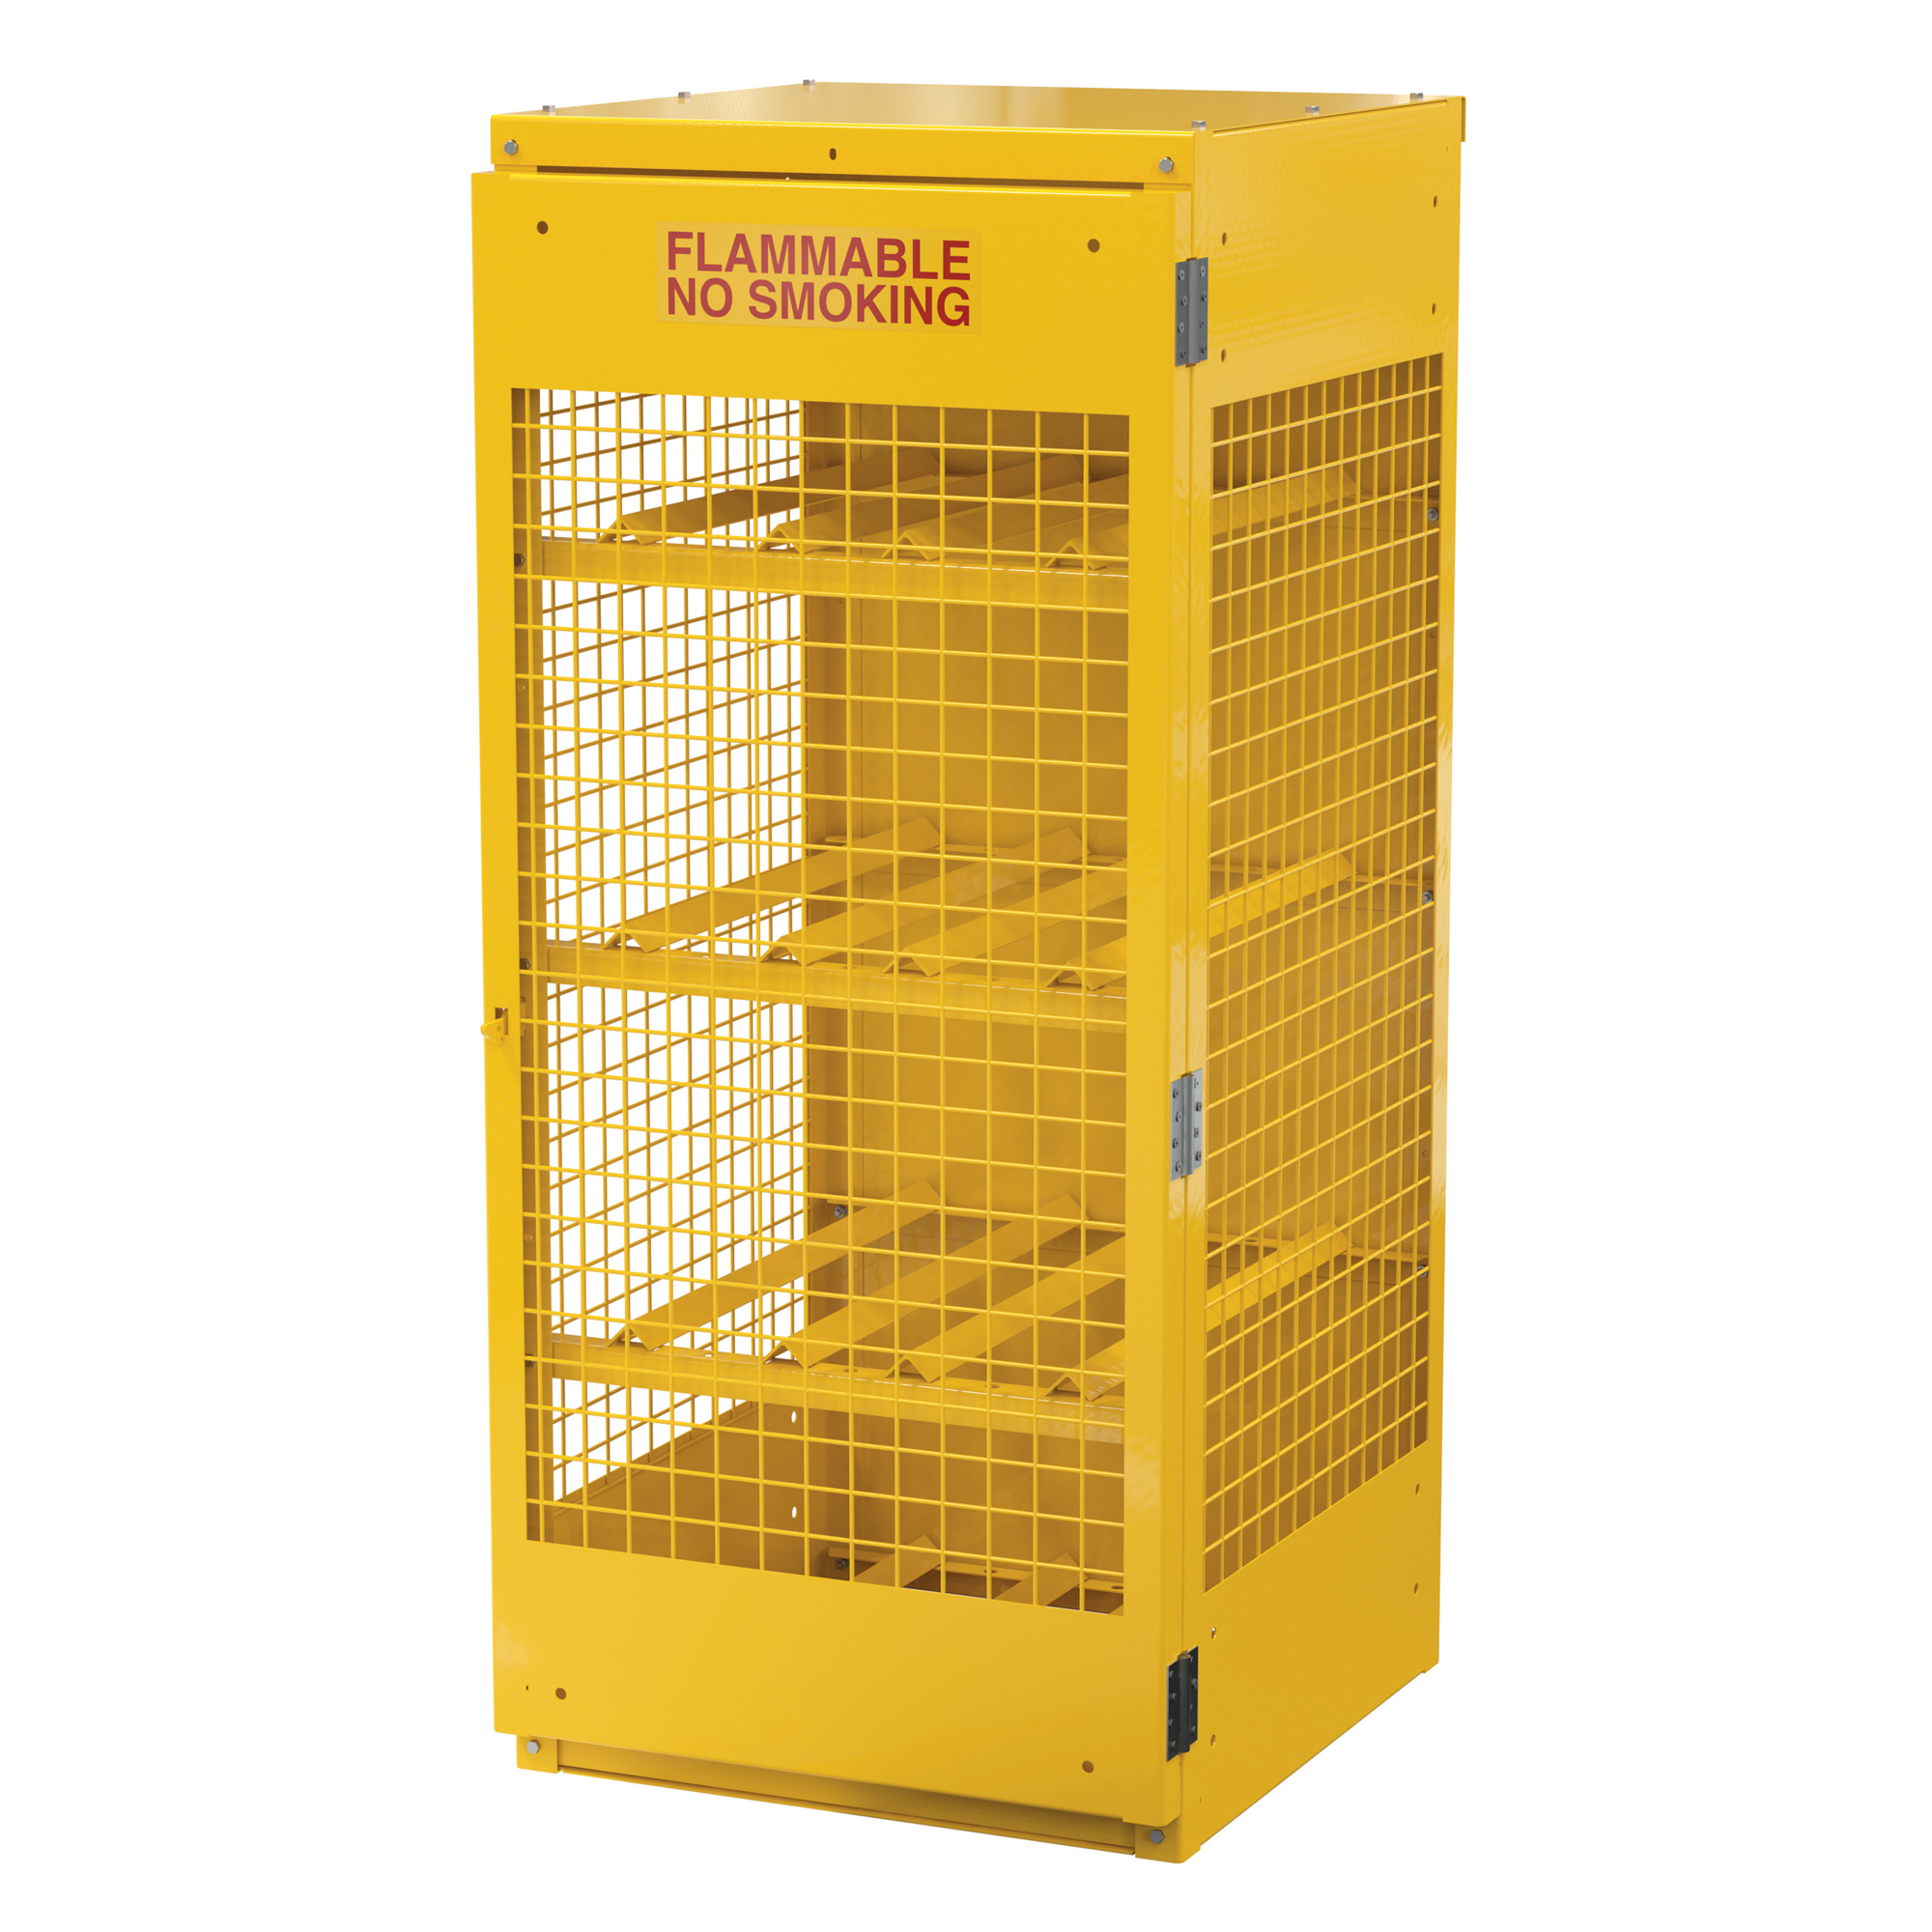 Vestil, 8 Capacity horizontal cylinder cabinet knockdown, Height 68.25 in, Width 30 in, Color Yellow, Model CYL-H-8-KD